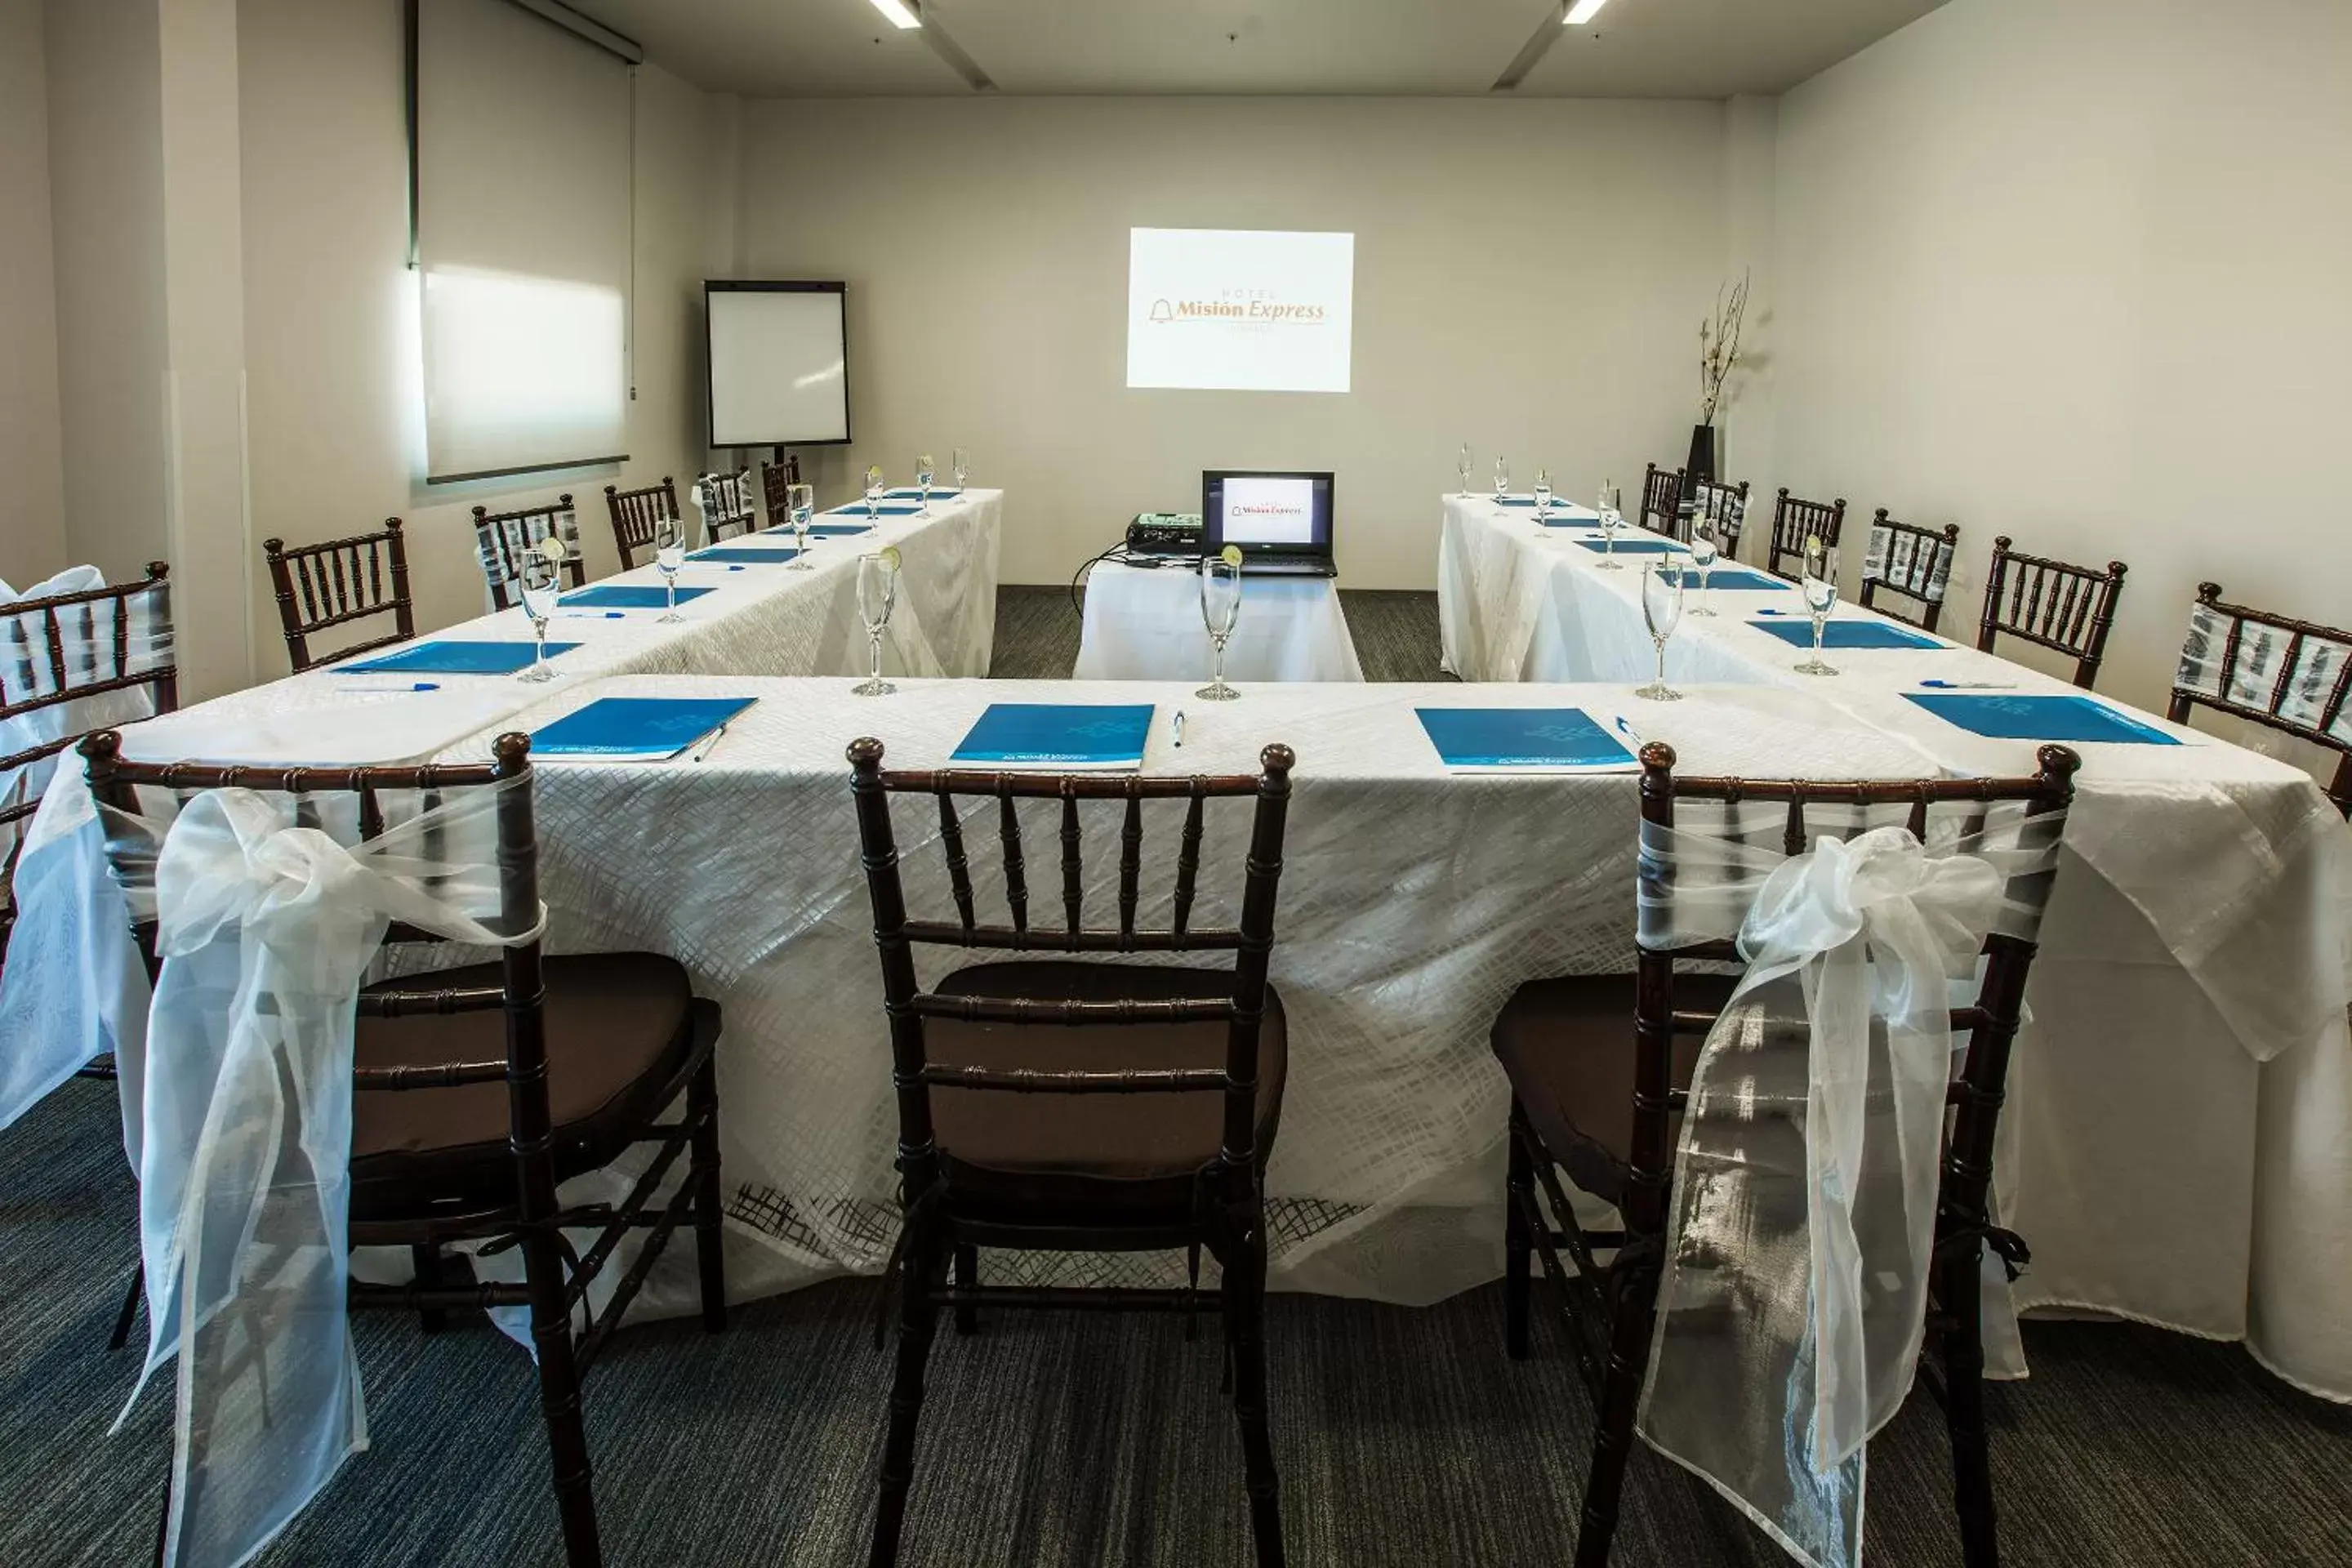 Meeting/conference room in Mision Express Durango